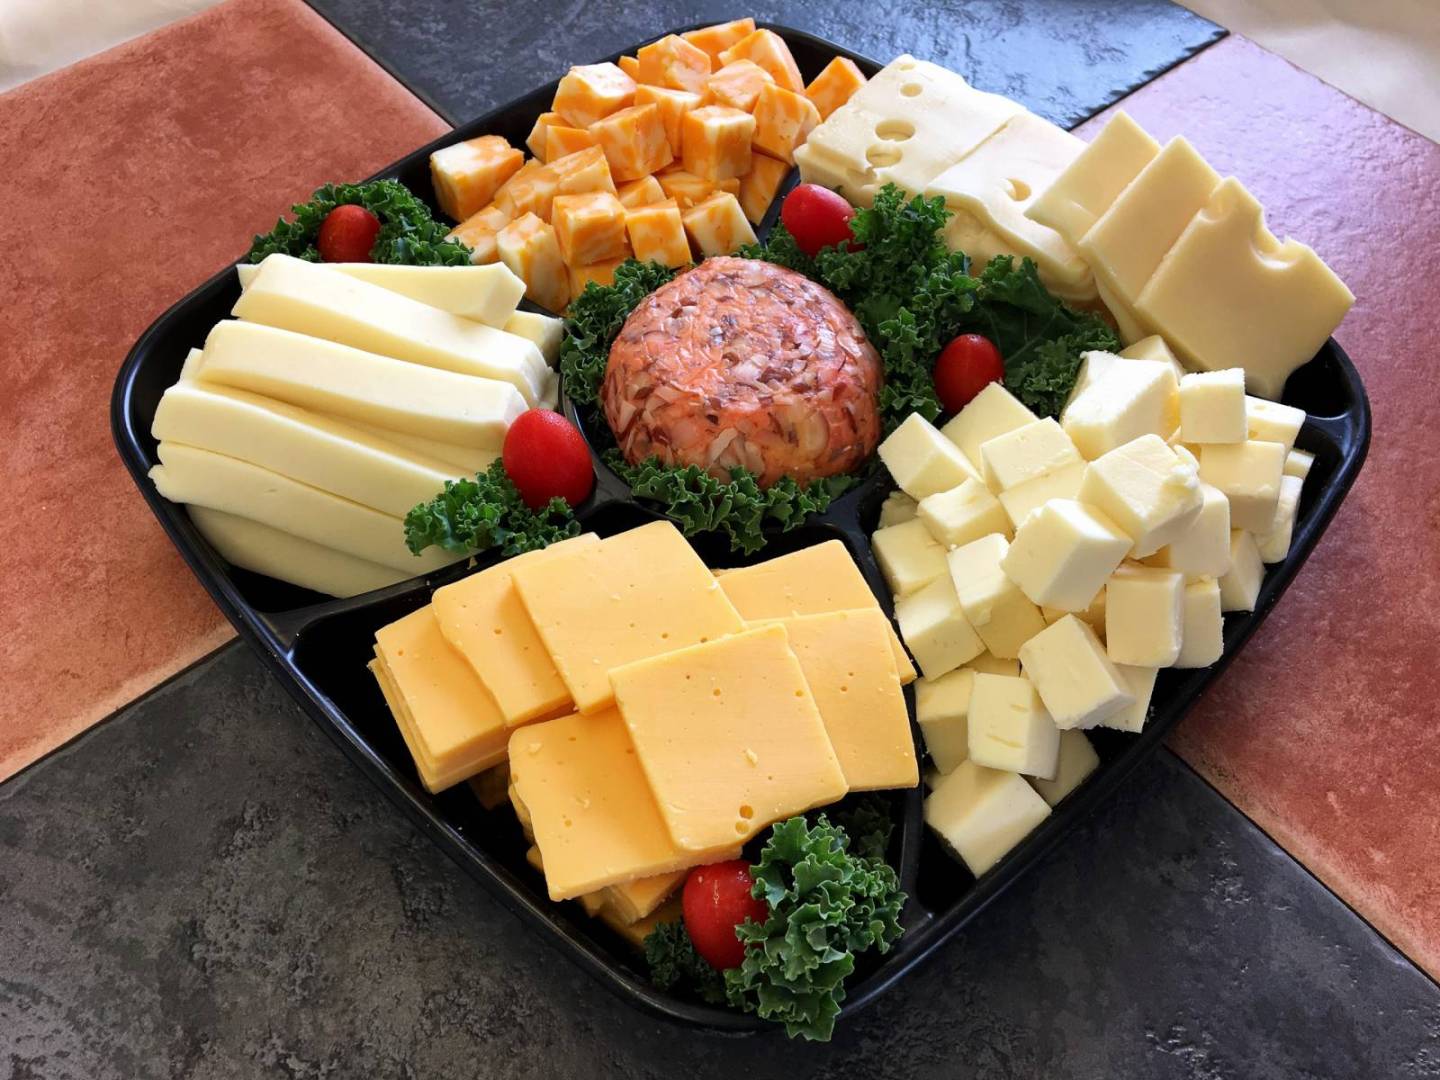 Top 25+ best Meat trays ideas on Pinterest Cheese party trays, Deli